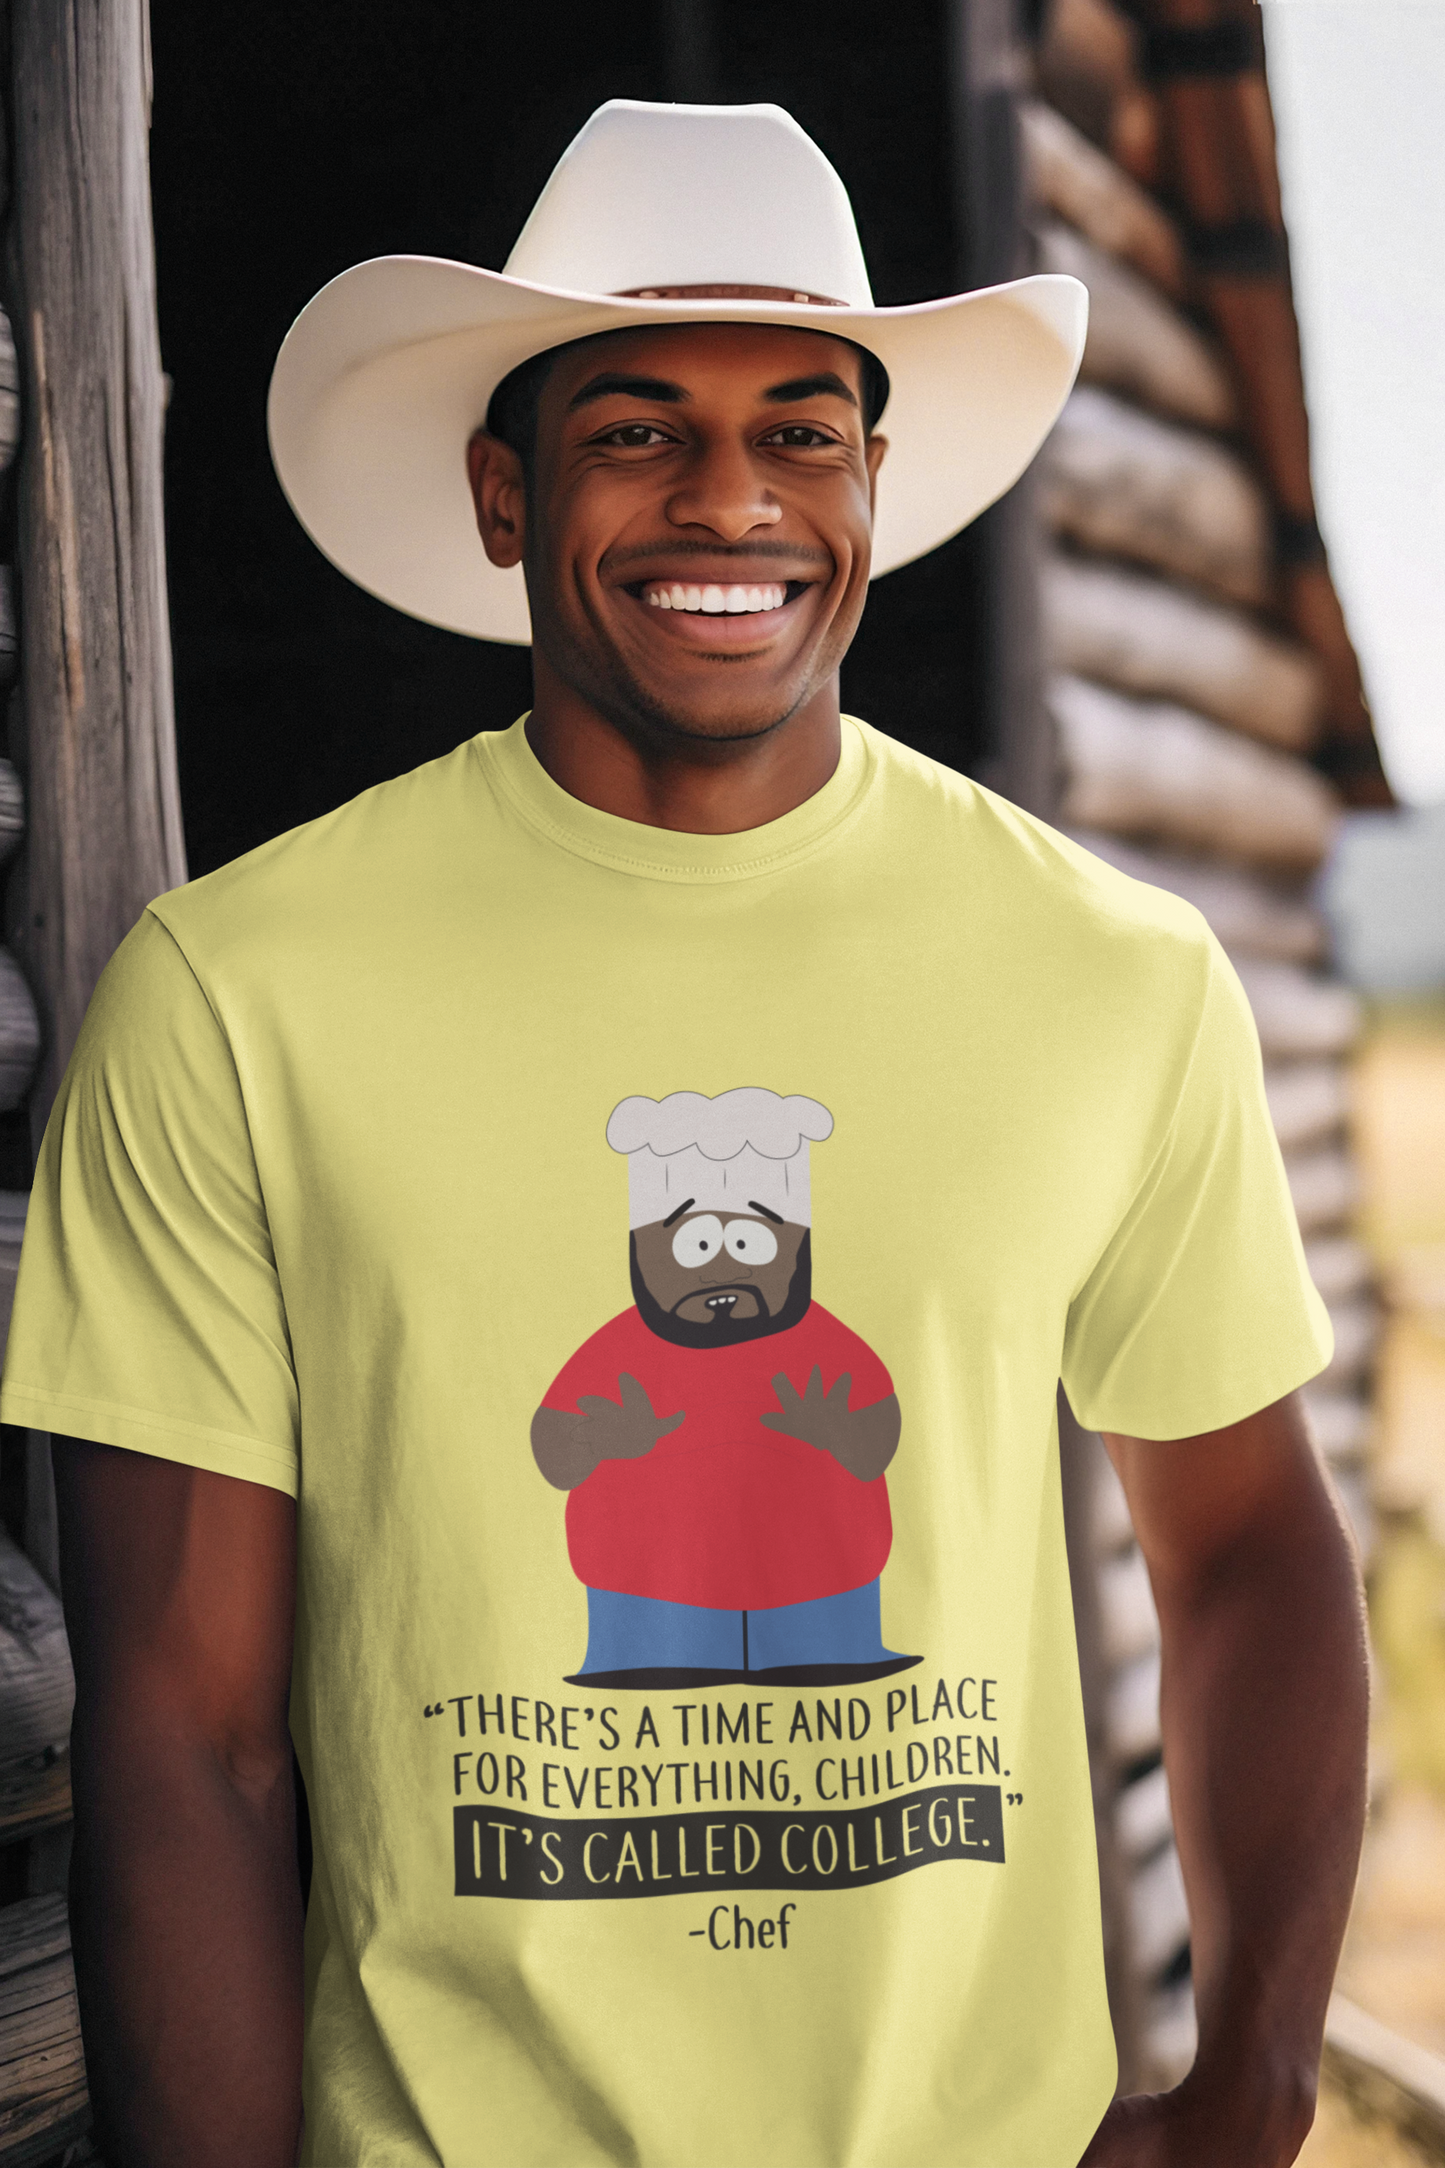 "THERE'S A TIME AND PLACE FOR EVERYTHING" - Chef, South Park | Unisex T-Shirt